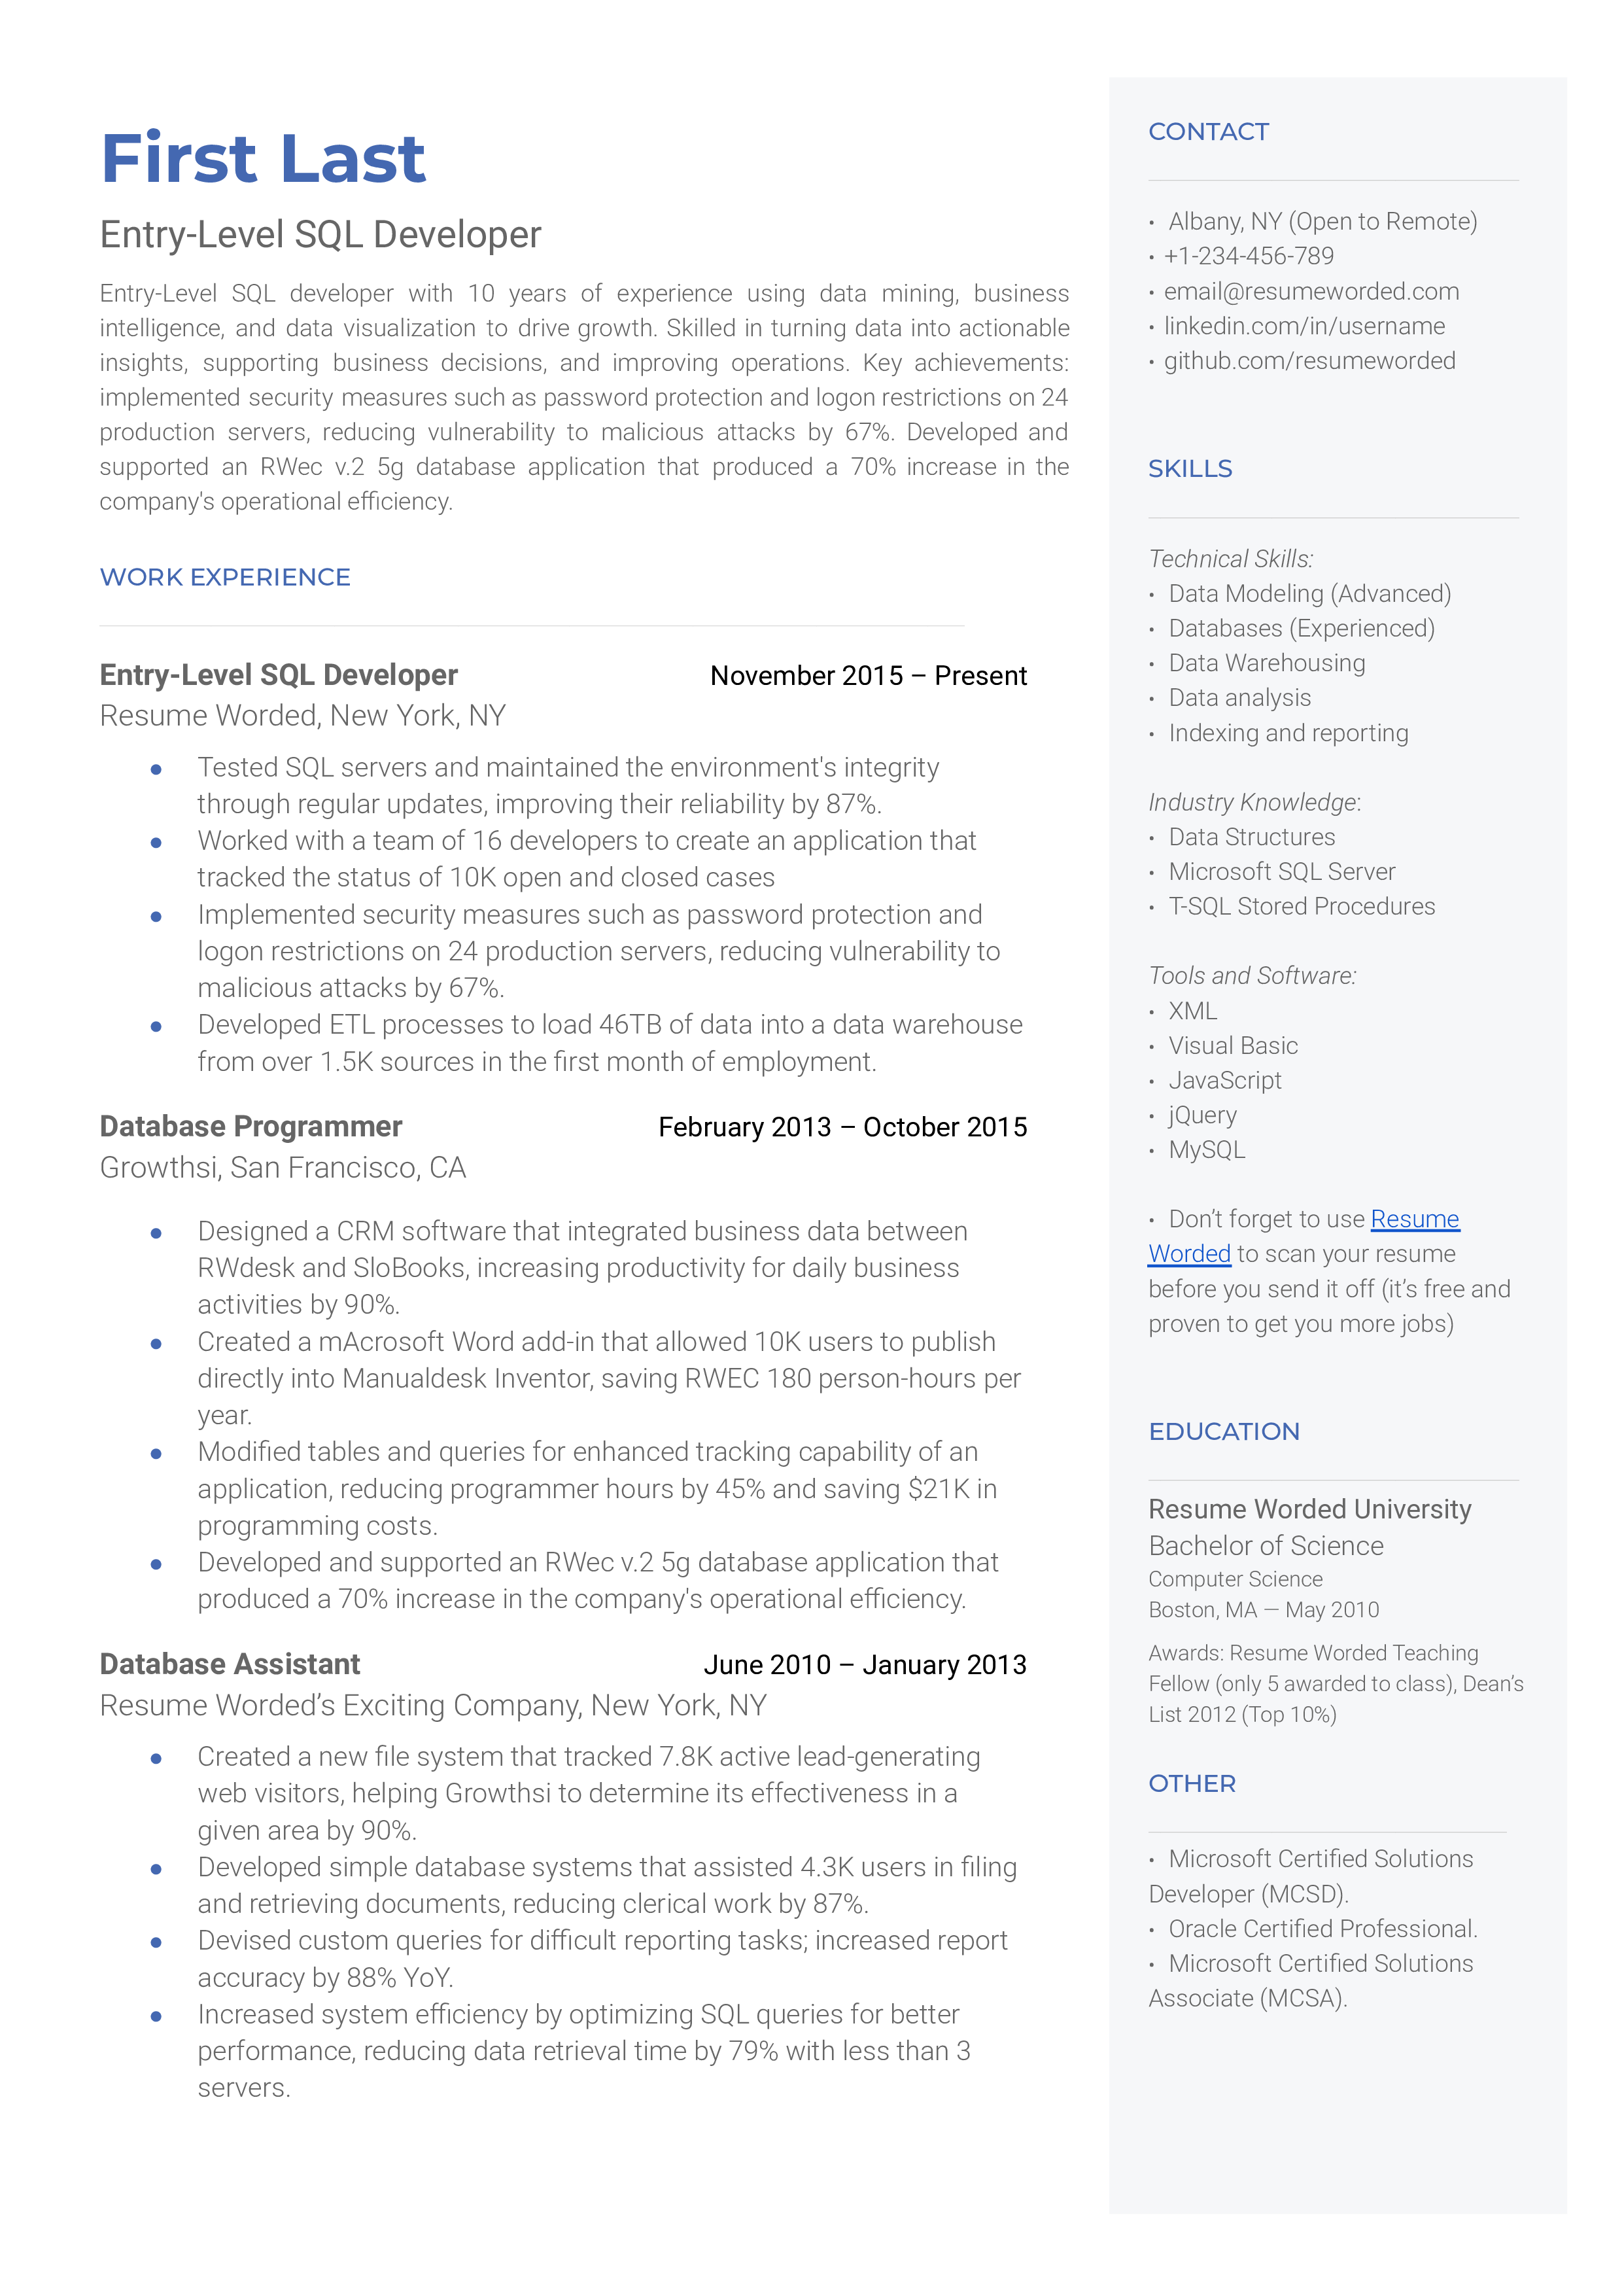 How We Improved Our resume In One Month